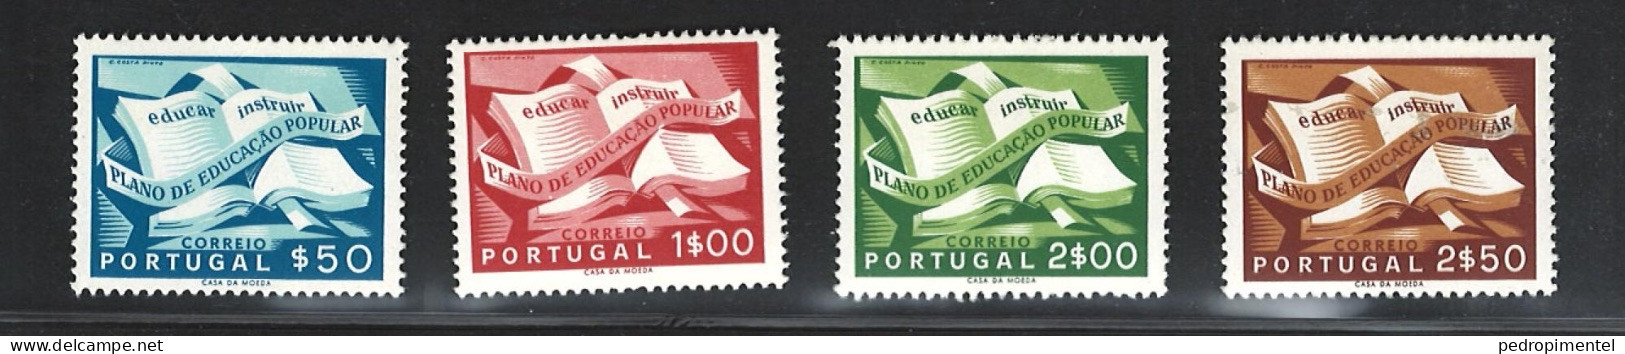 Portugal Stamps 1954 "Popular Education Plan" Condition MNH #796-799 - Unused Stamps